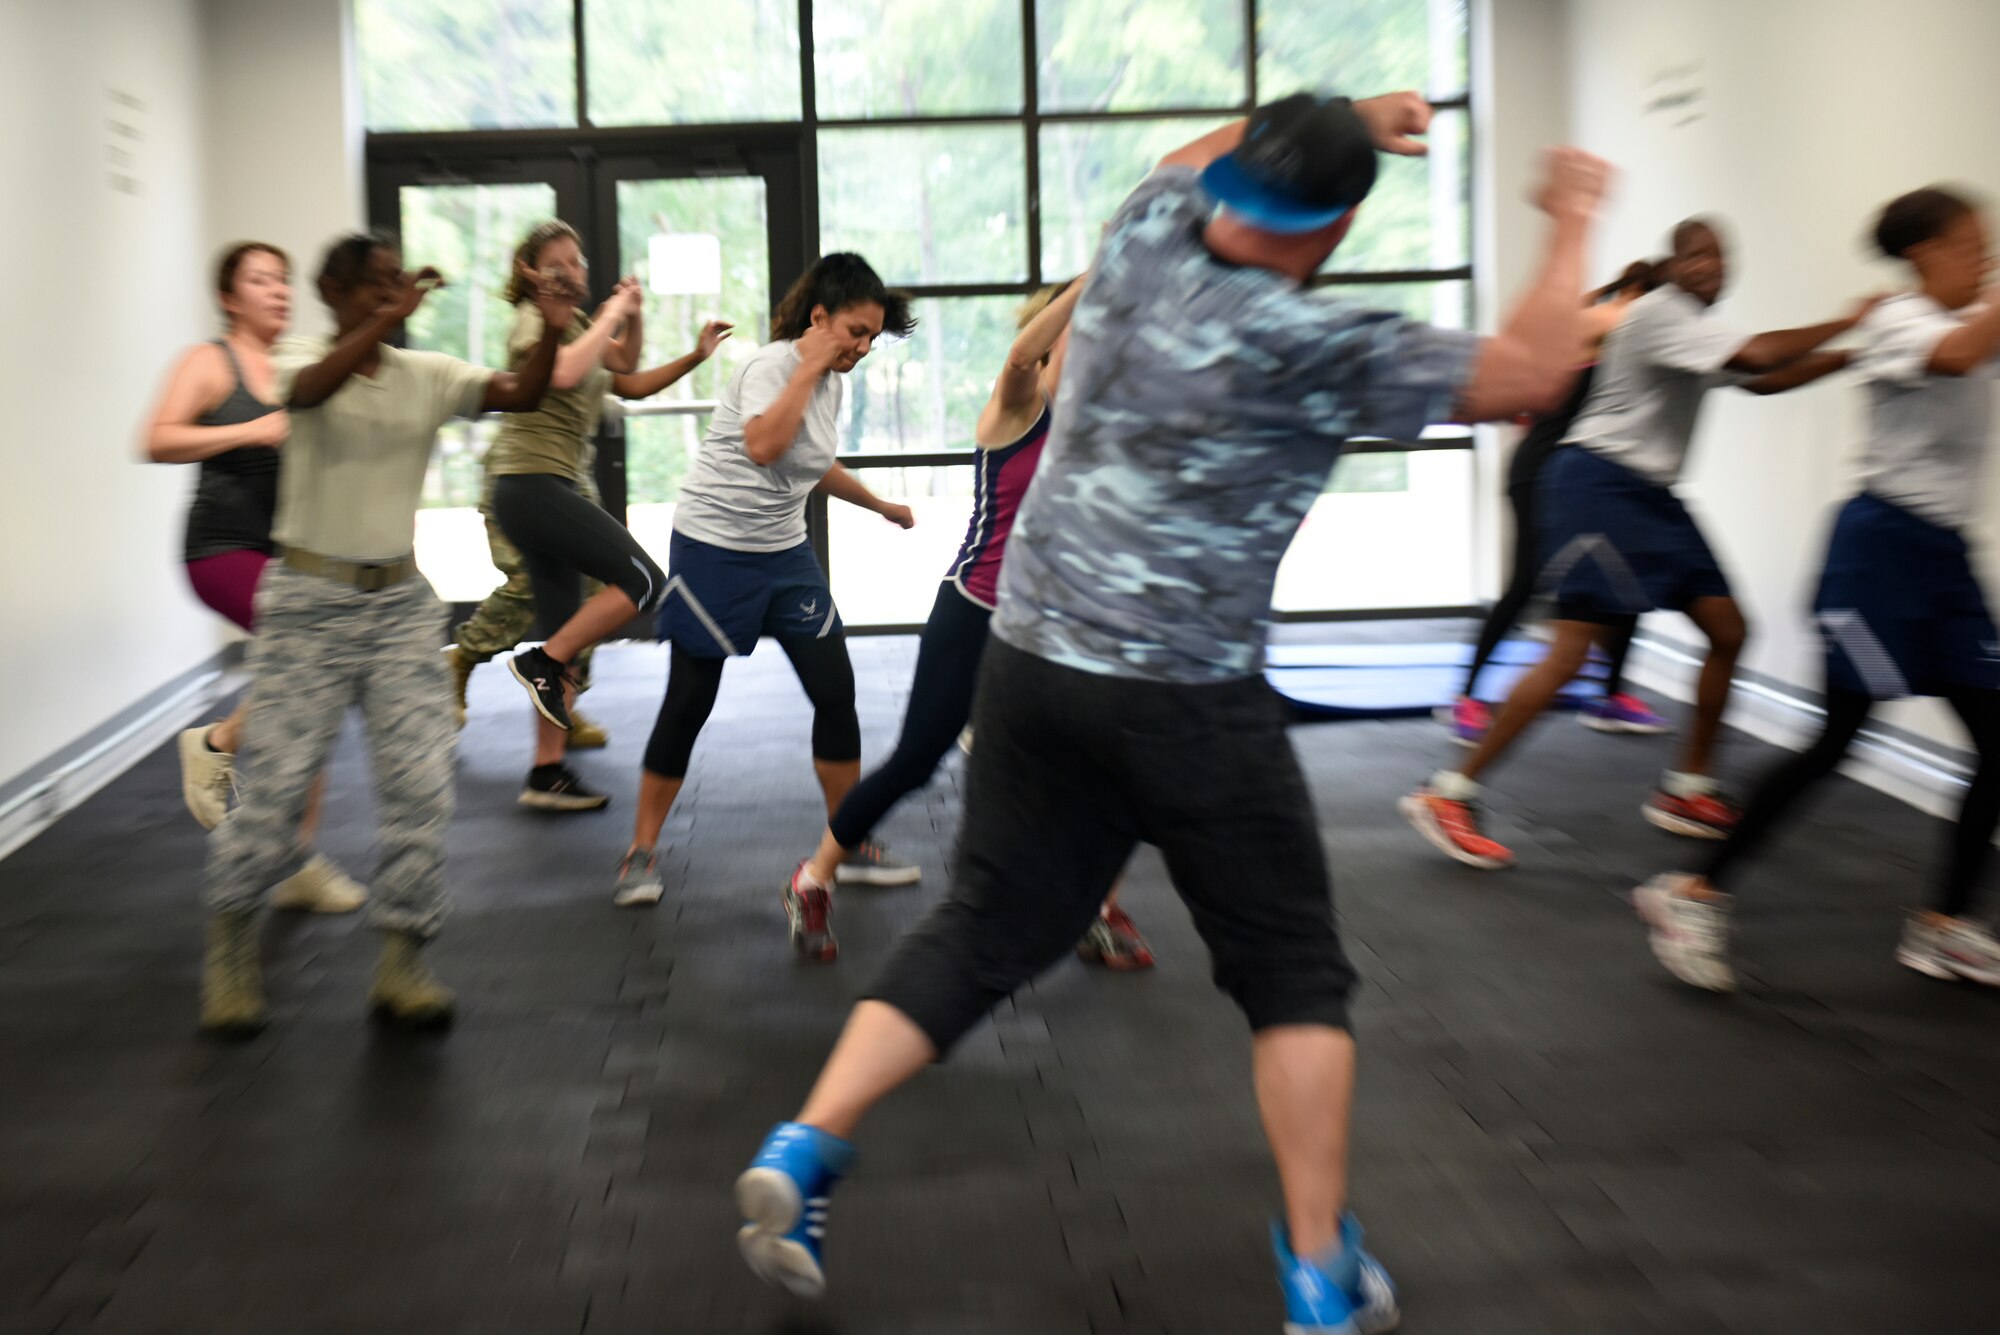 Members of the North Carolina Air National Guard participate in a National Hispanic Month inspired bootcamp Zumba class instructed by Will Fields, cousin of U.S. Air Force 1st. Sgt. Jorge Bedoya, 145th Medical Group, Oct. 5th, 2019. More than twenty people came out to the class as a means to appreciate another culture, and to enjoy the Hispanic music and exercise.